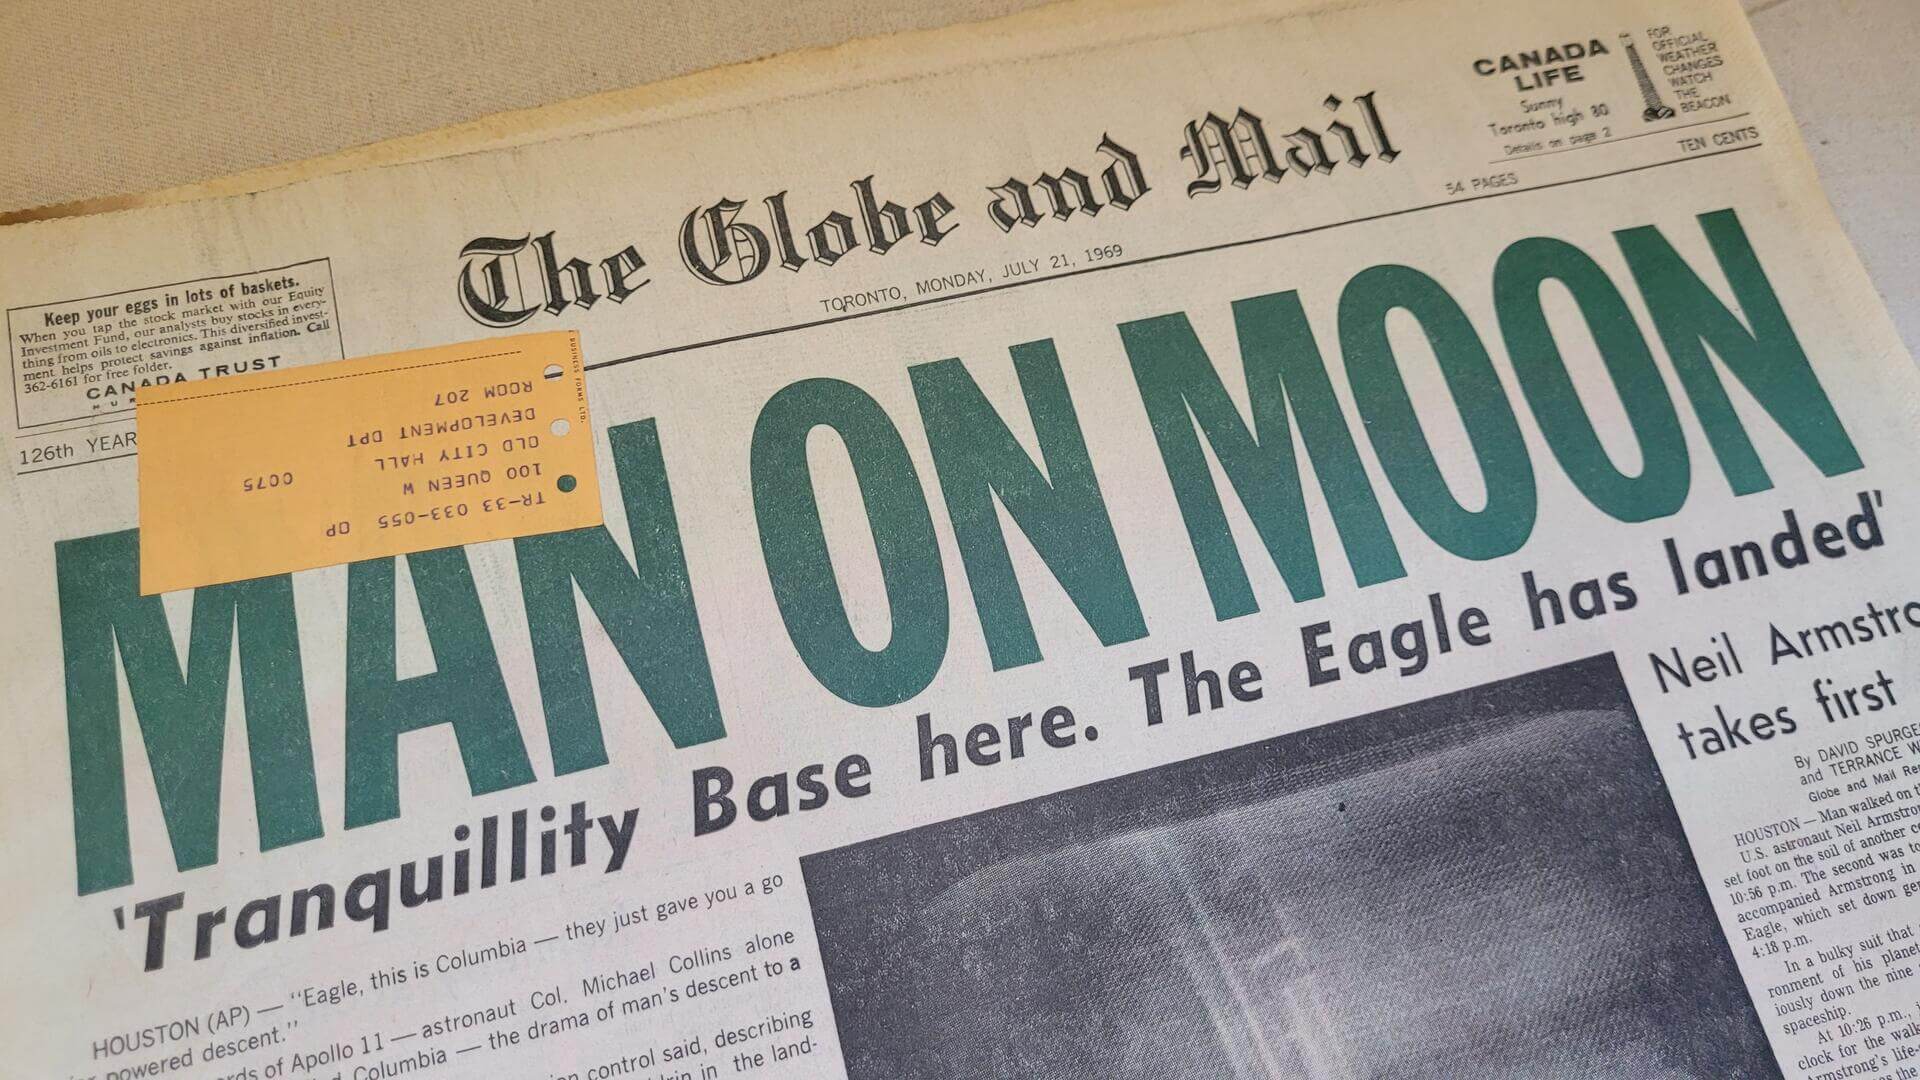 man-on-moon-globe-and-mail-newspaper-edition-july-21-1969-vintage-scientific-historic-events-collectible-newspaper-magazine-canadiana-date